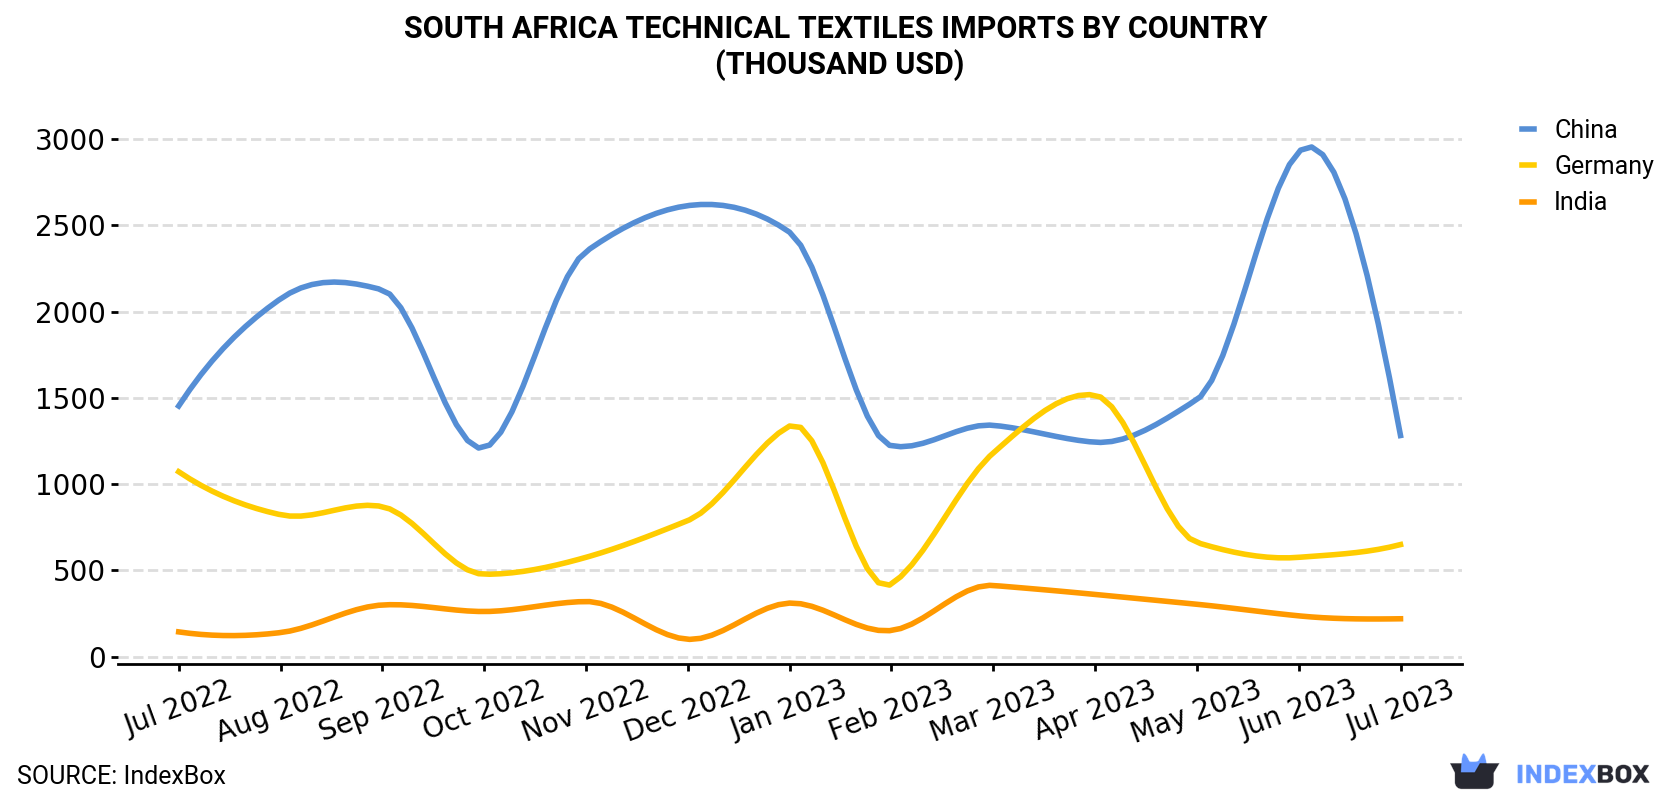 South Africa Technical Textiles Imports By Country (Thousand USD)